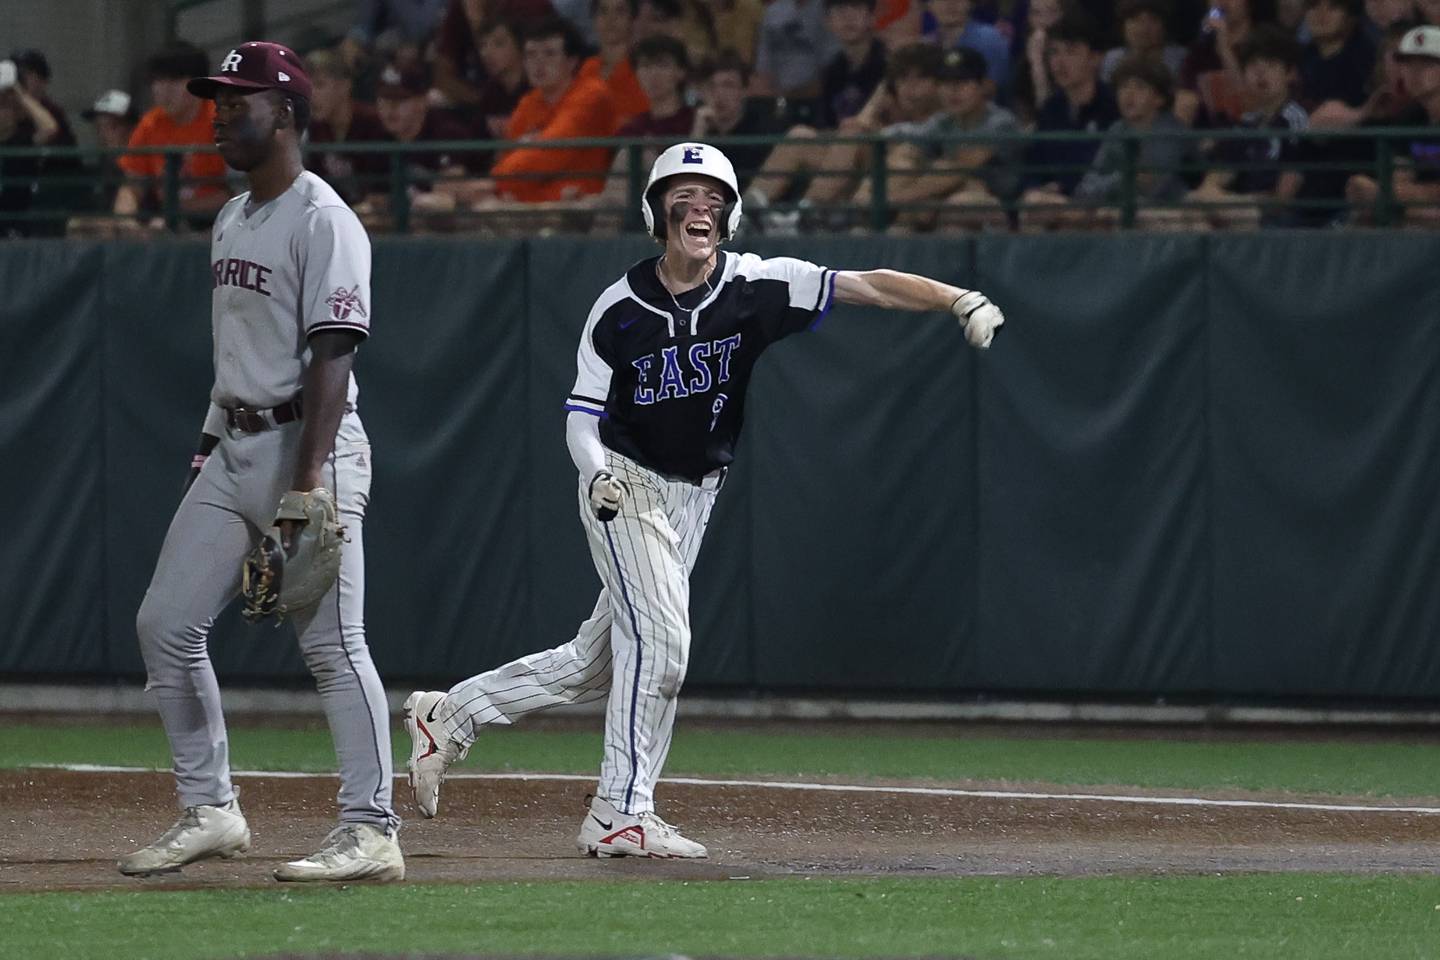 Lincoln-Way East’s Matt Hudik celebrates a 2-run single against Brother Rice in the Class 4A Crestwood Supersectional on Monday, June 5, 2023 in Crestwood.